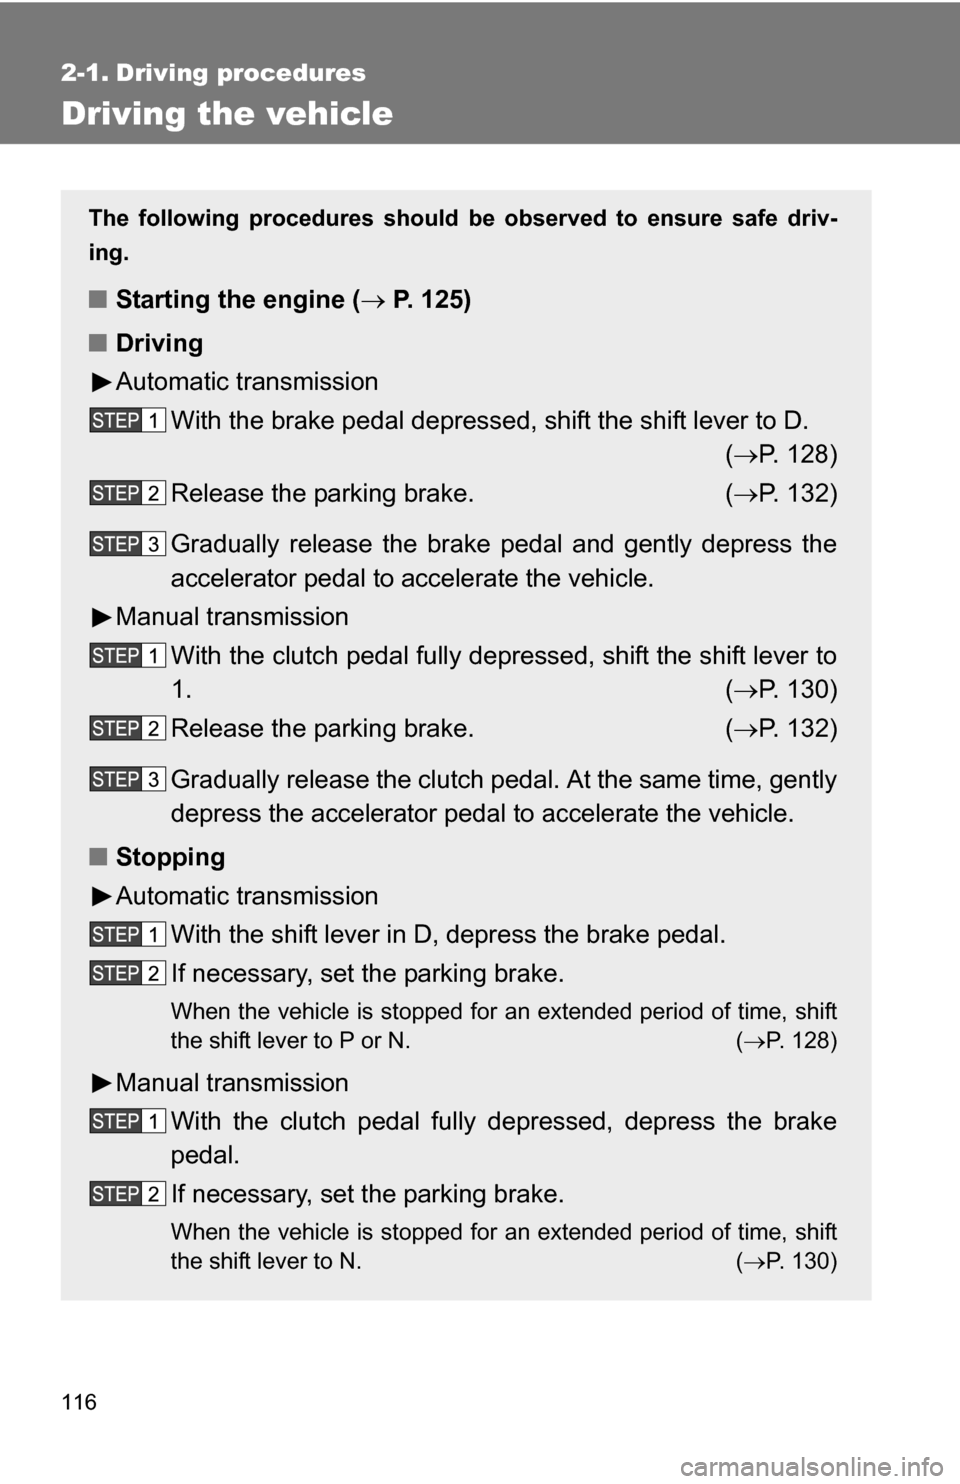 TOYOTA YARIS 2009 2.G Owners Manual 116
2-1. Driving procedures
Driving the vehicle
The following procedures should be observed to ensure safe driv-
ing.
■ Starting the engine (  P. 125)
■ Driving
Automatic transmission
With the 